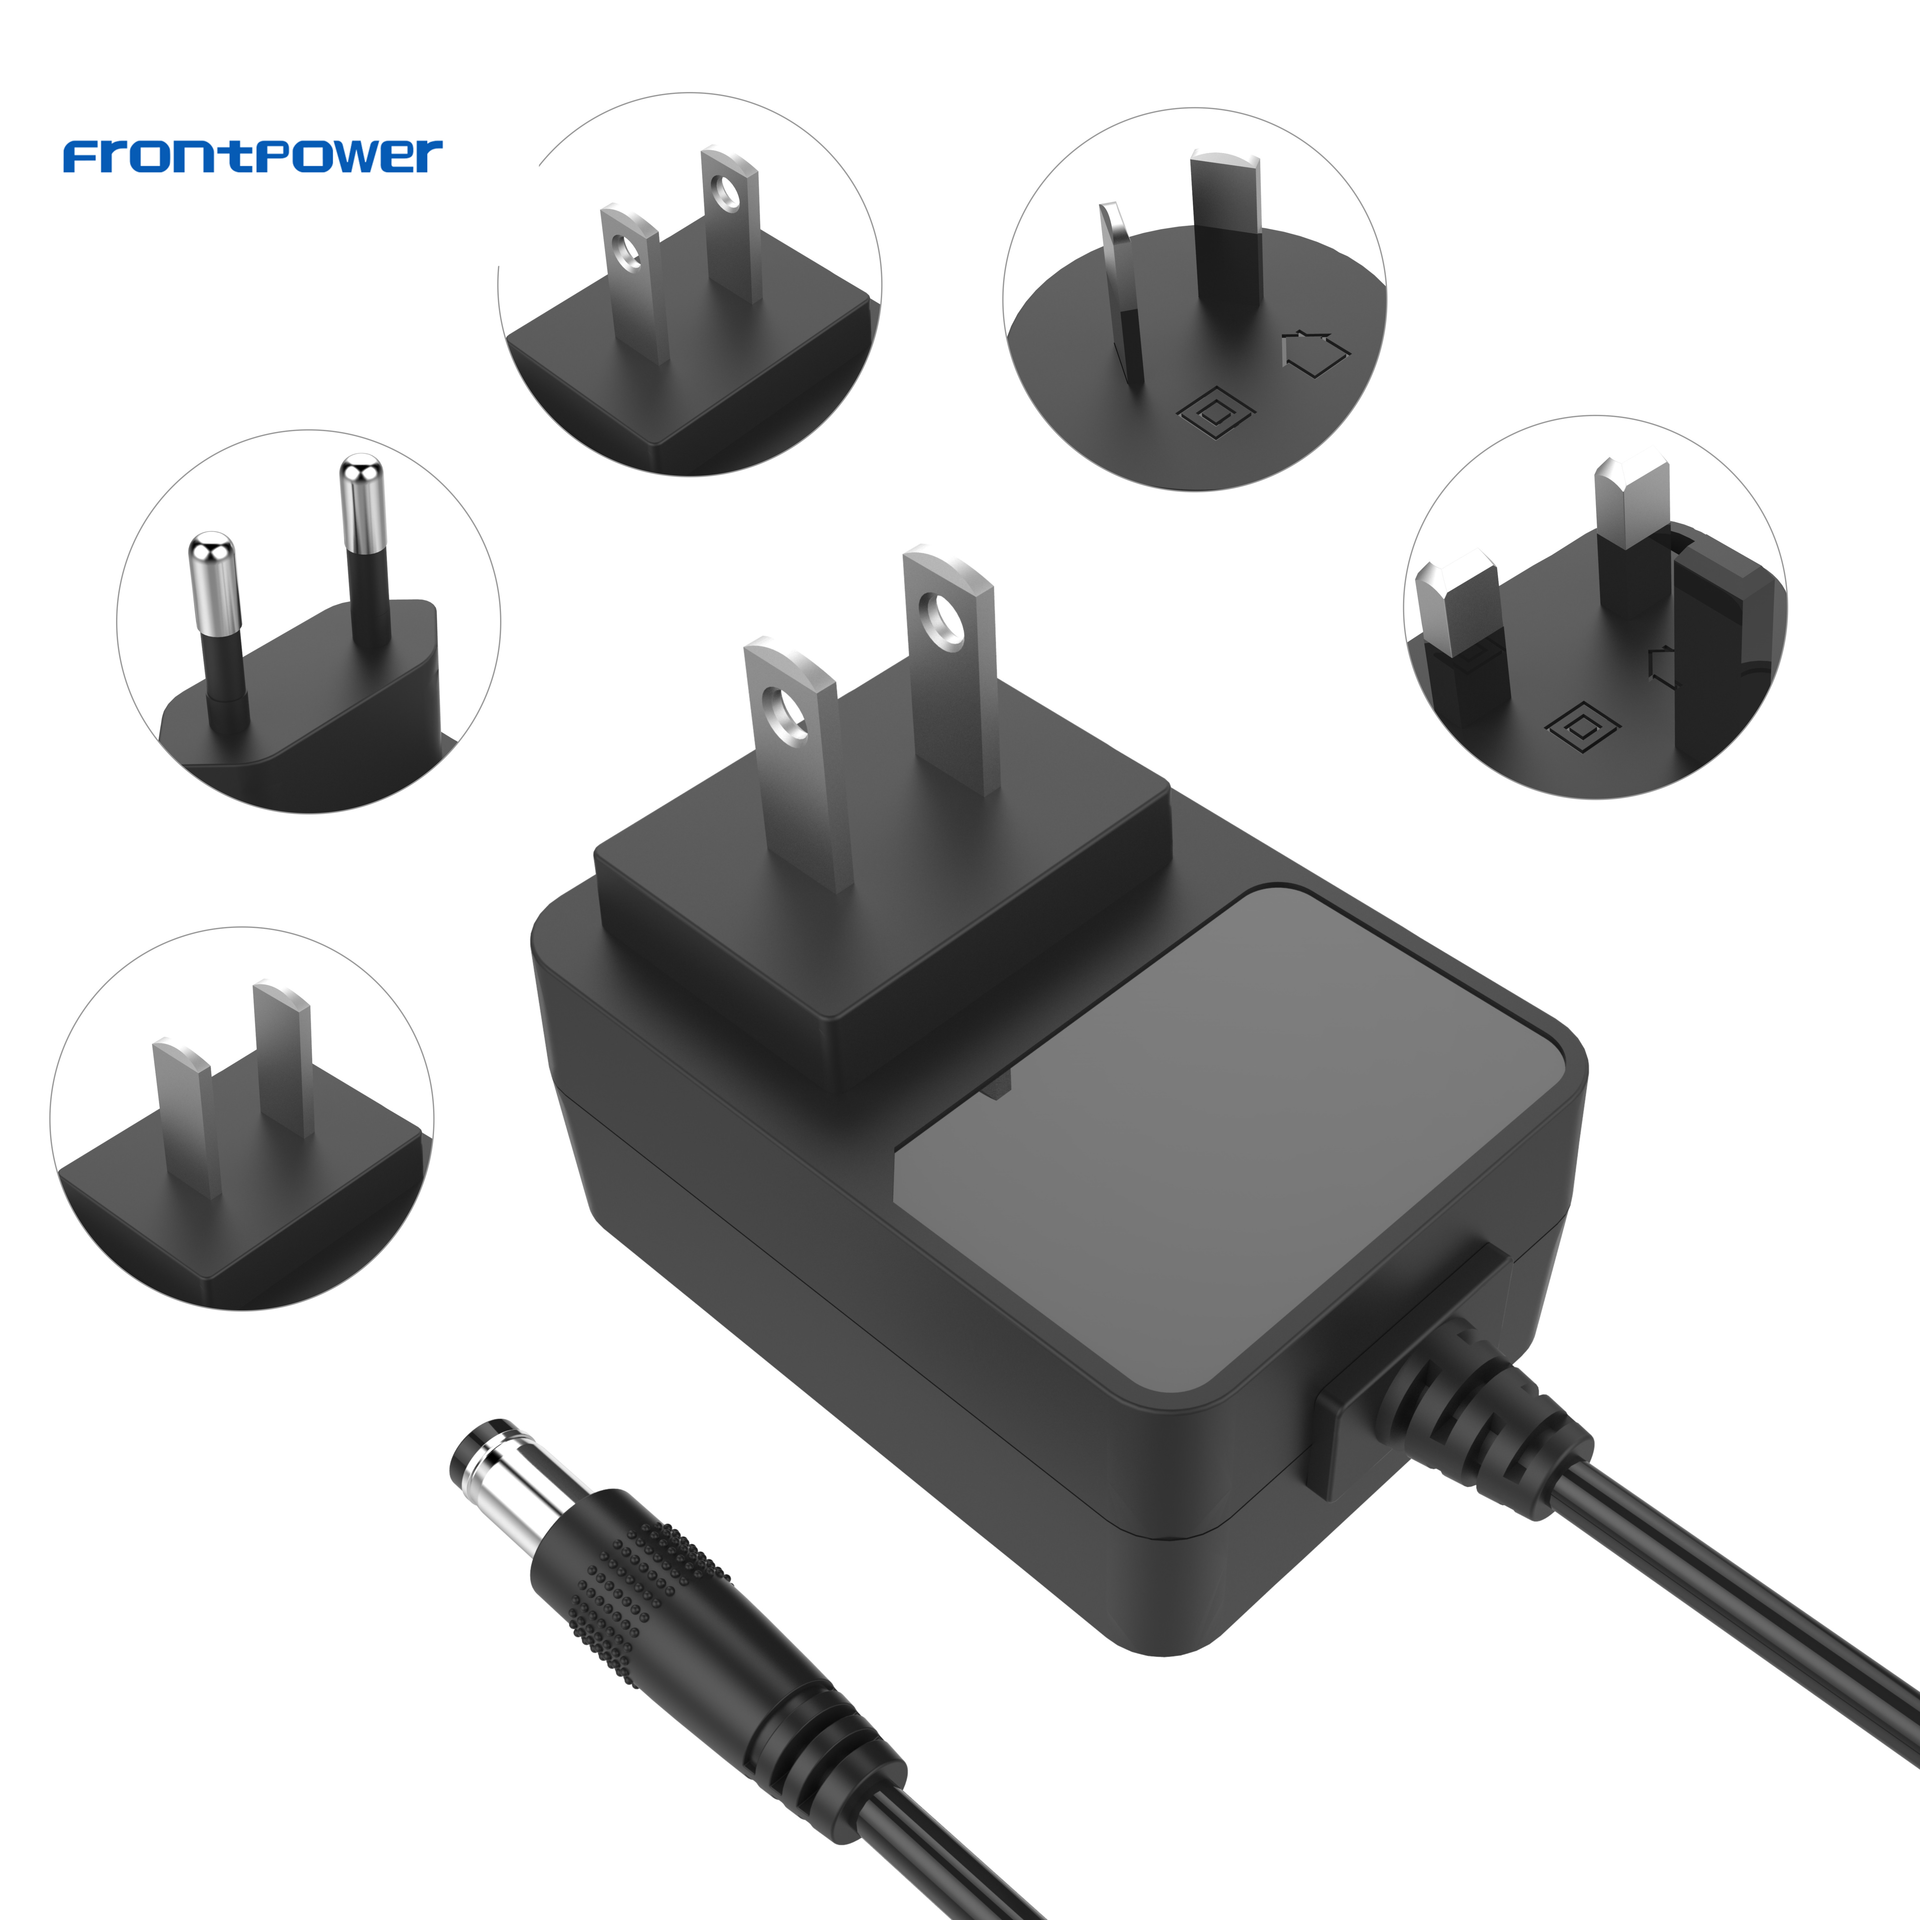 5V 6V 8V 9V 12V 24V US EU UK AU Plug SMPS Wall Mount Power Adapter Supply Switch ACDC Charger for Camera Router